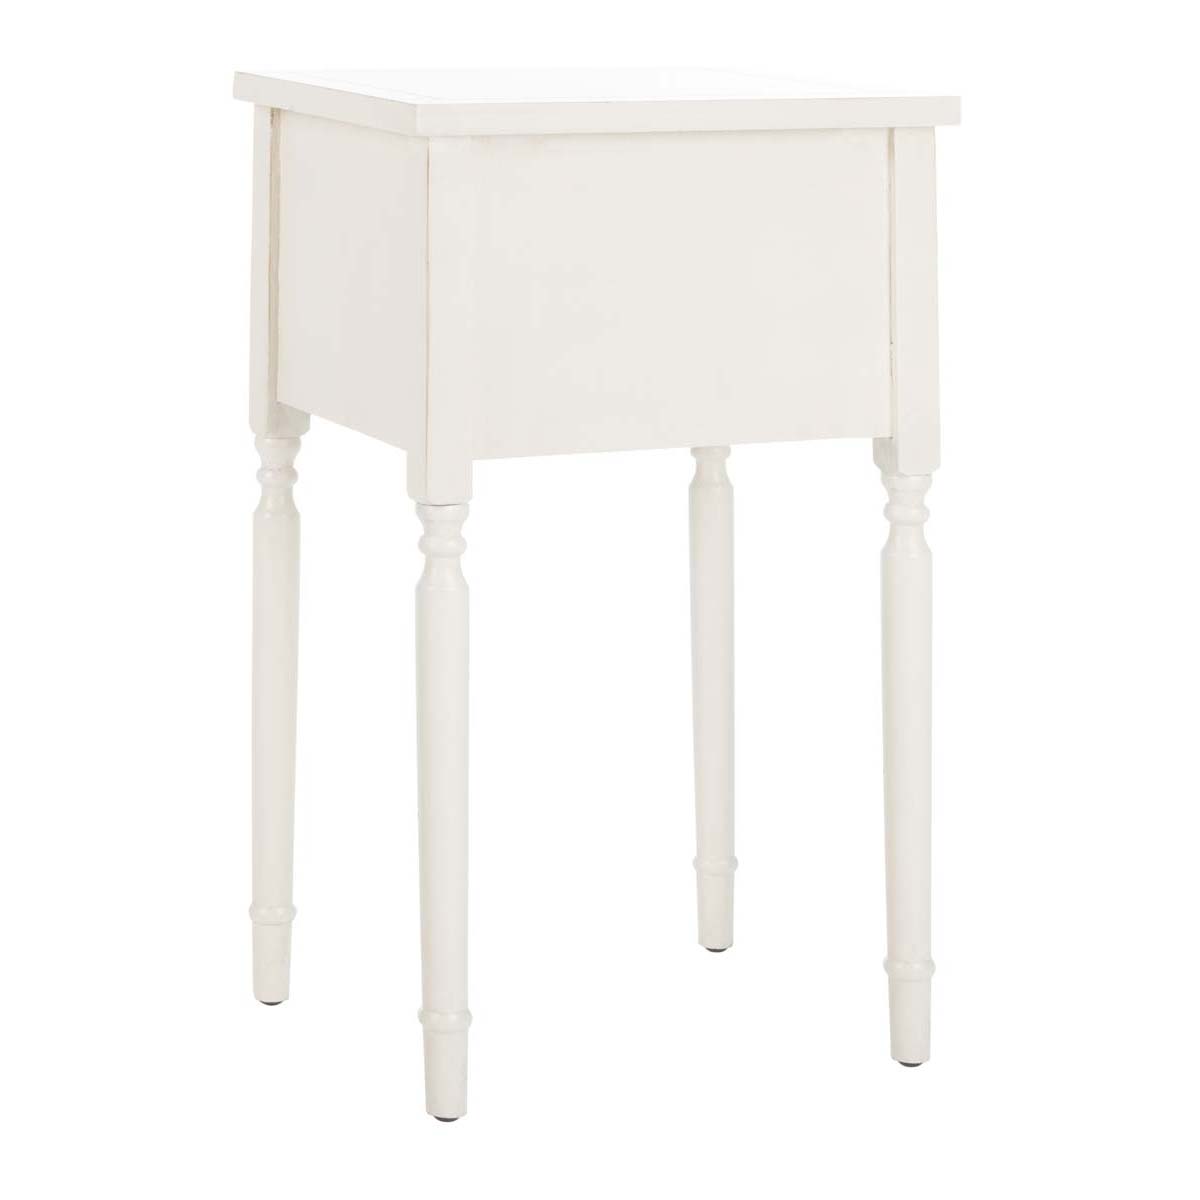 Safavieh Marilyn End Table With Storage Drawers , AMH6575 - White Birch